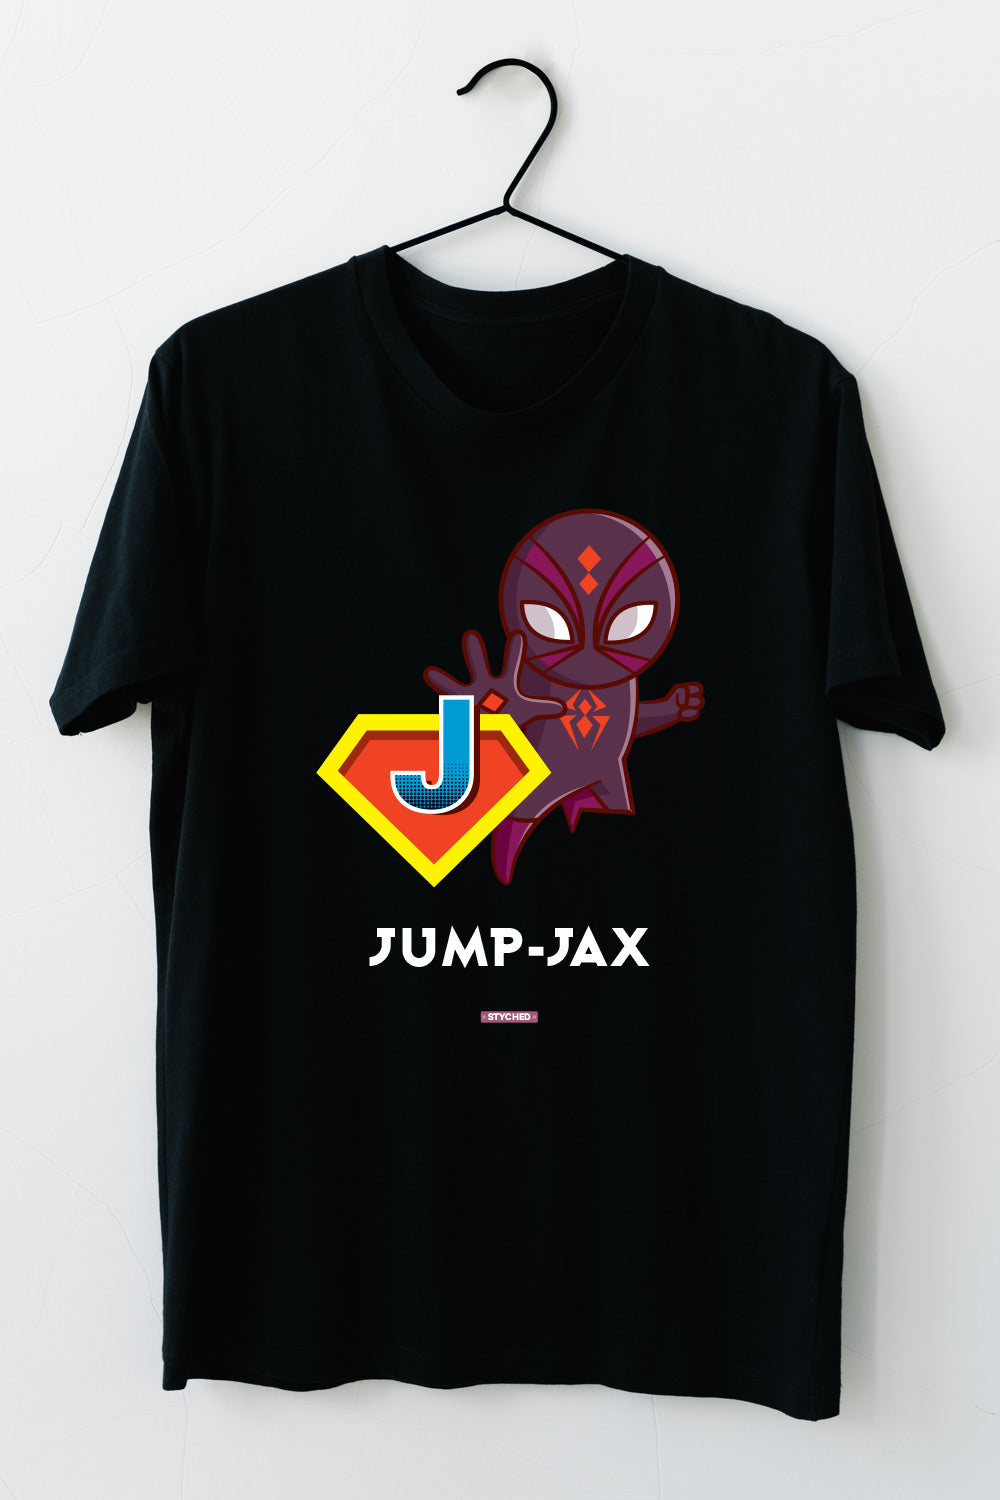 JumpJax by Styched Black Dry-Fit T-Shirt